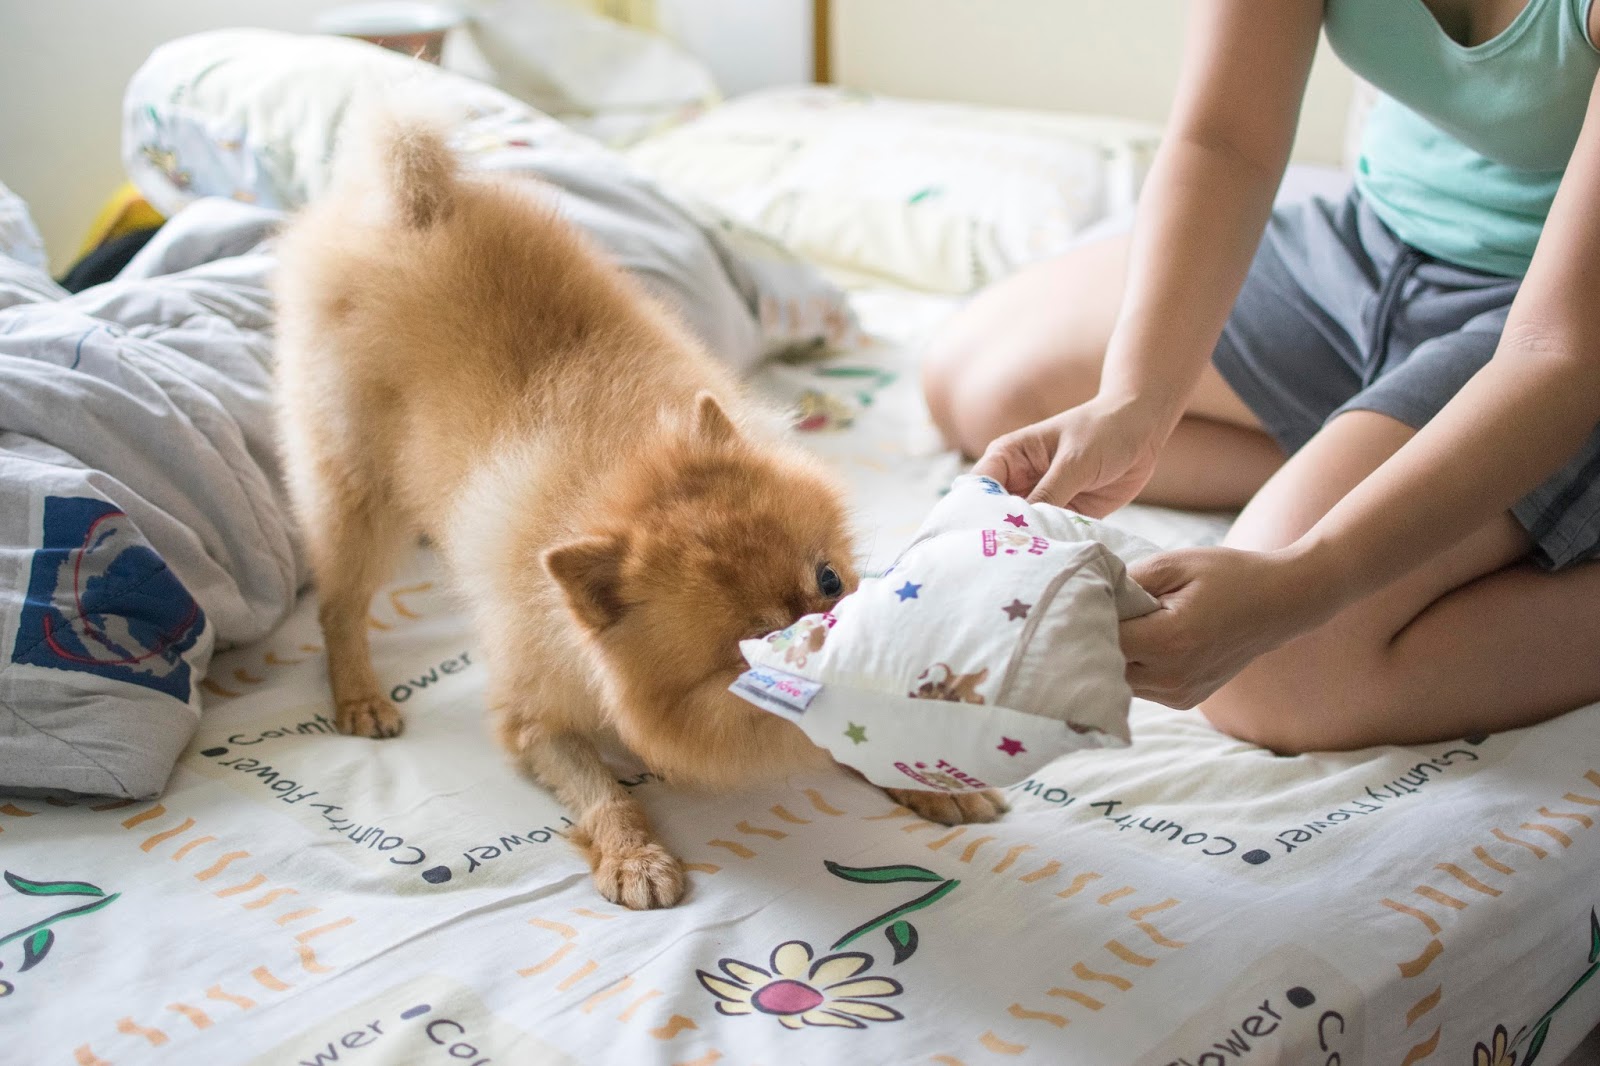 Animal Photography: Bobby the Pomeration Play Time with Pillow & Bolster